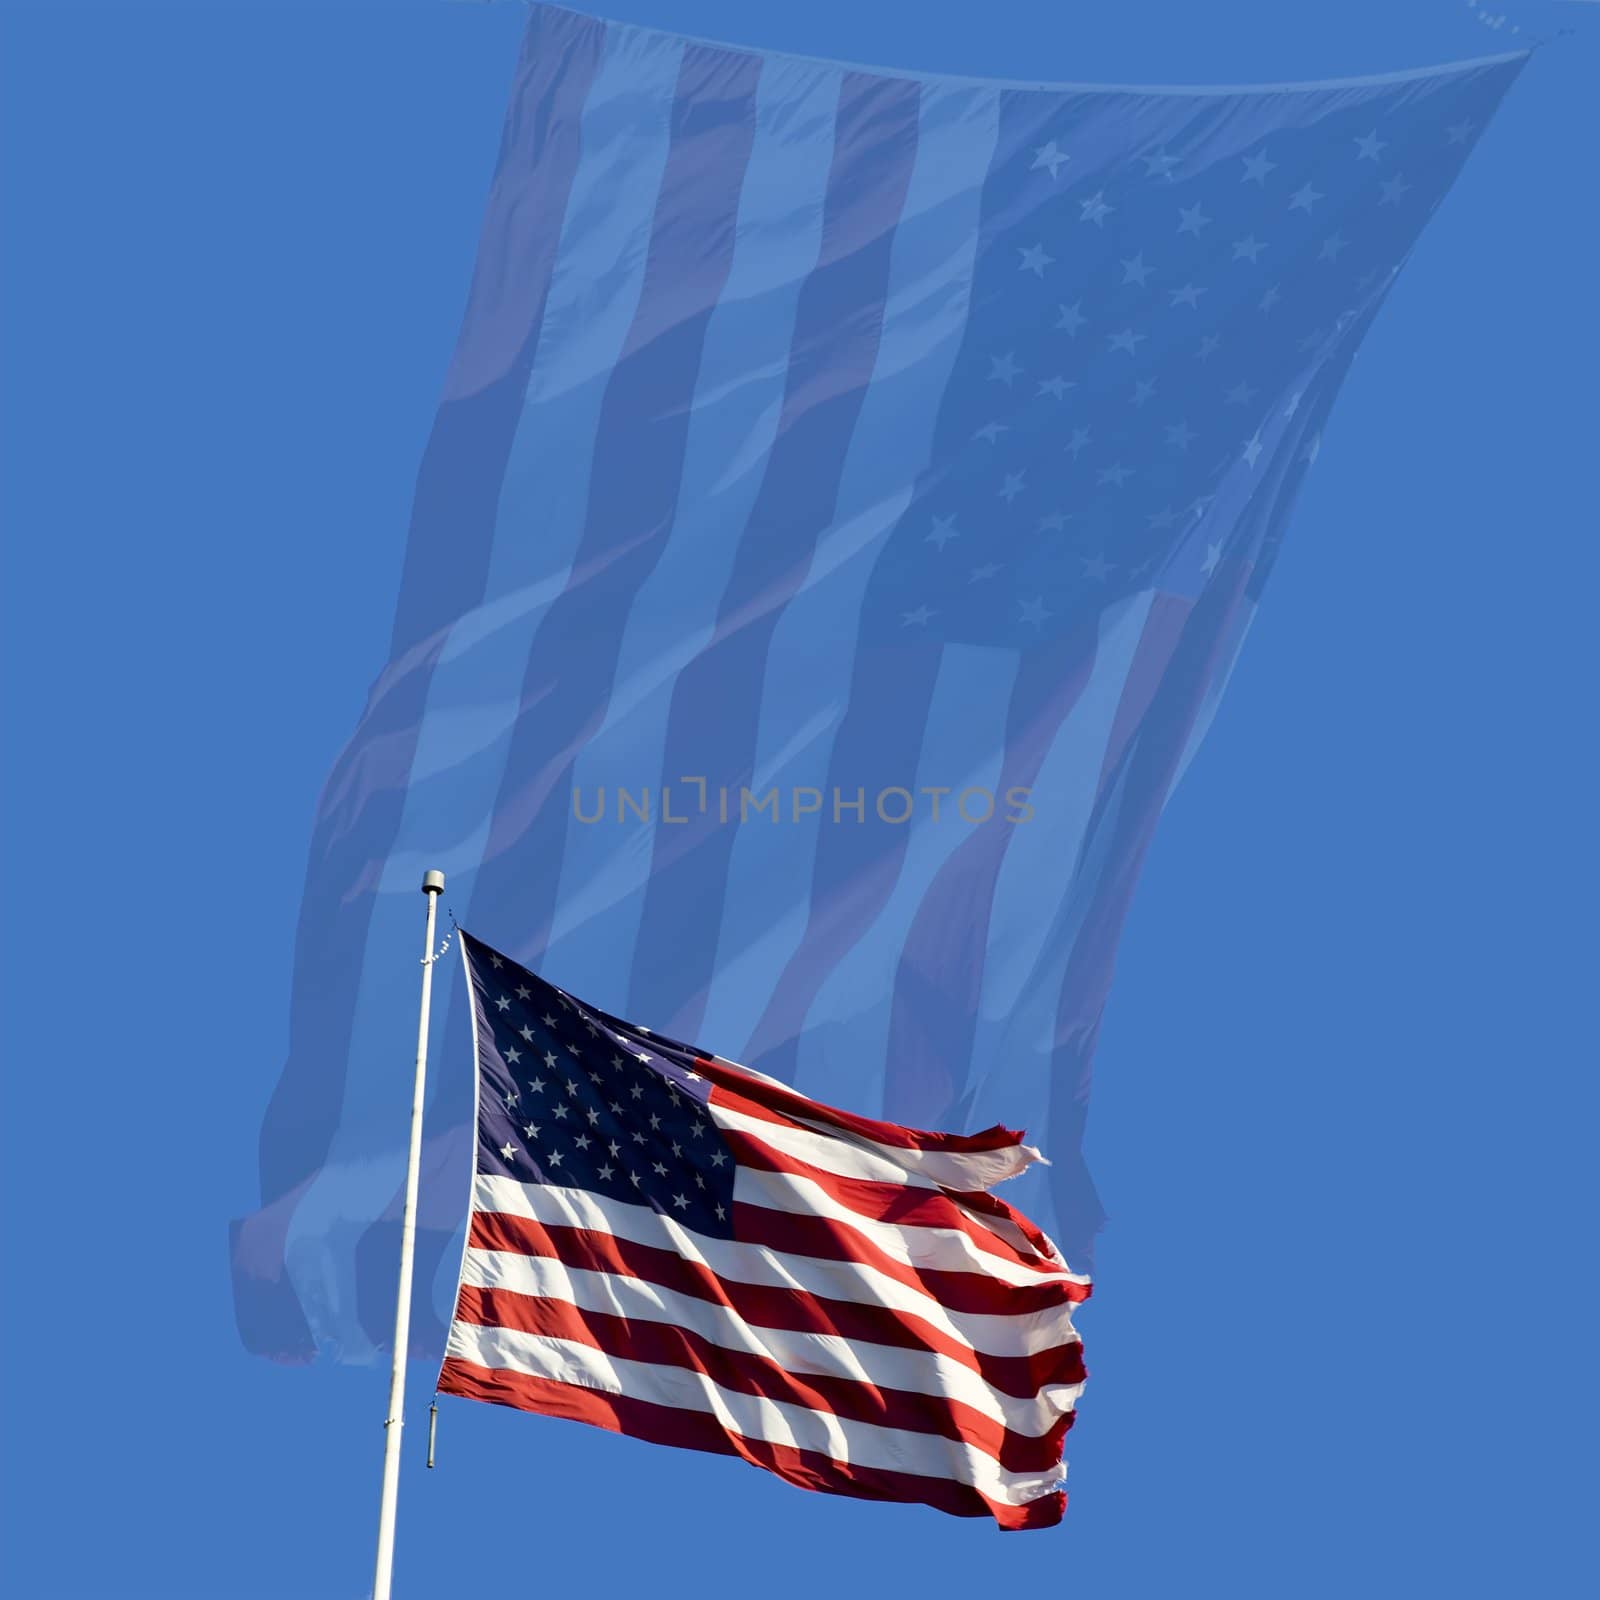 Stars and stripes flying in the wind on deep blue sky nice background for a patriotic display
